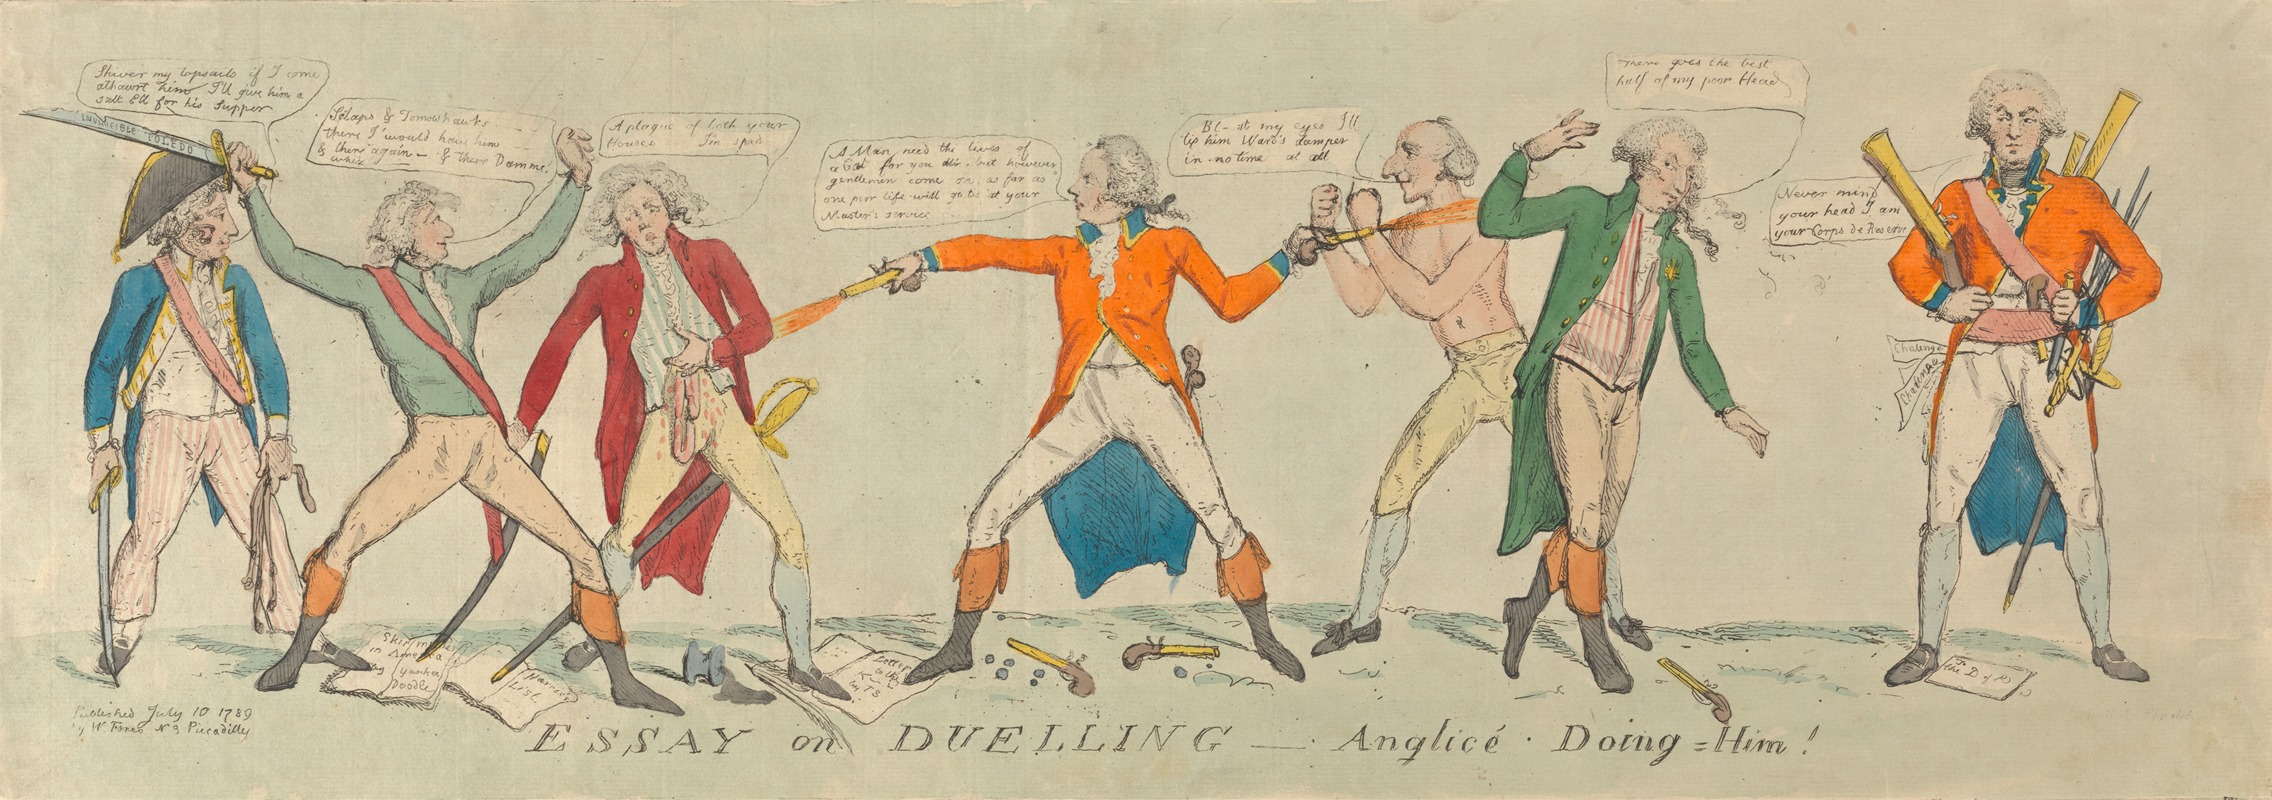 Samuel Collings - Essay on Duelling – Anglice Doing = Him!